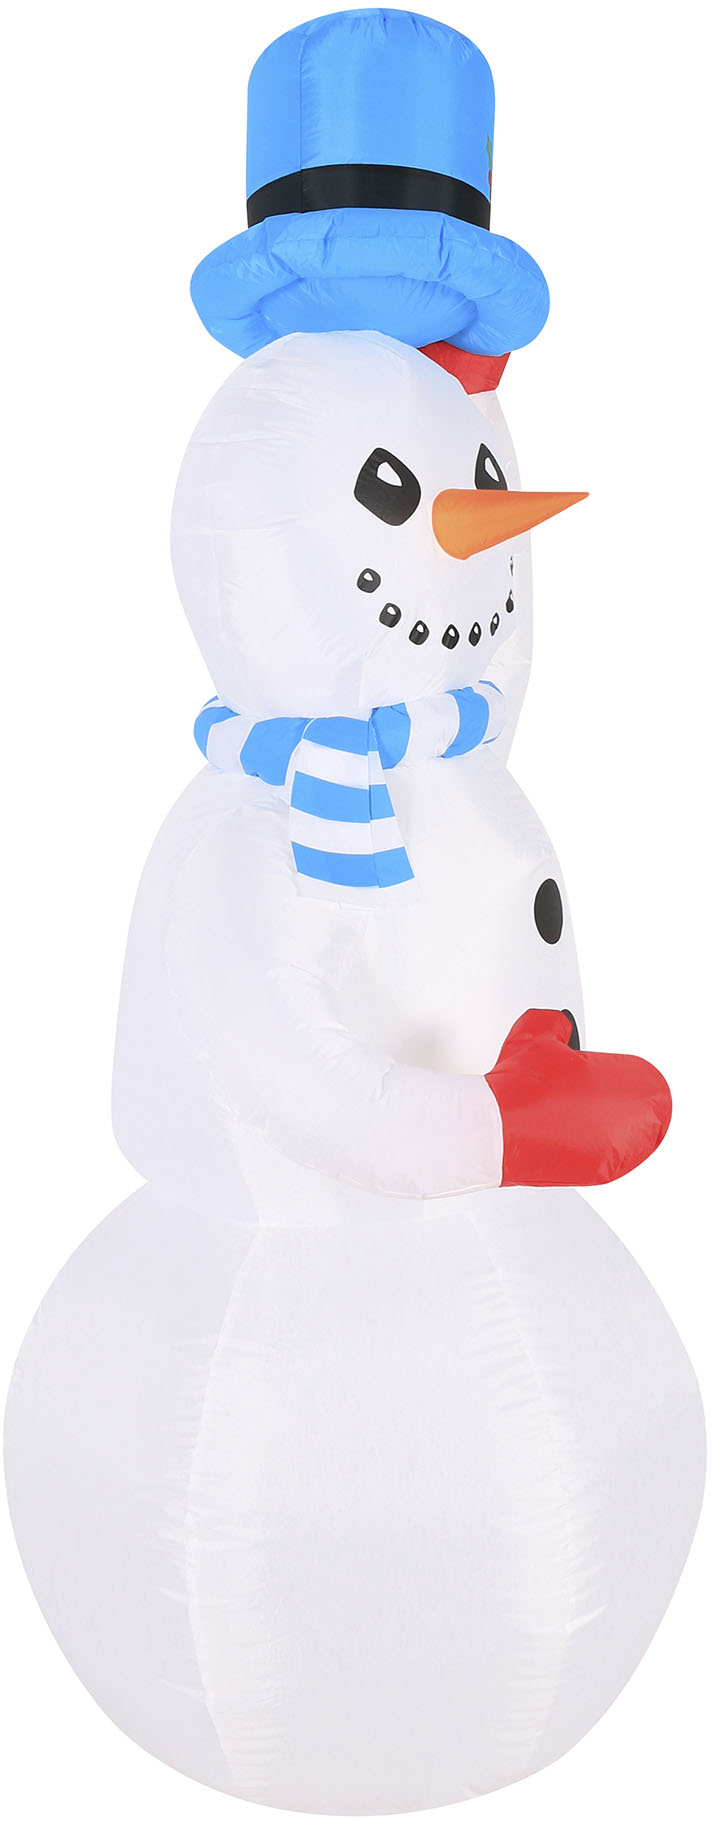 Best Buy: Occasions 7 ft tall Swirling Lights Snowman Inflatable 28834